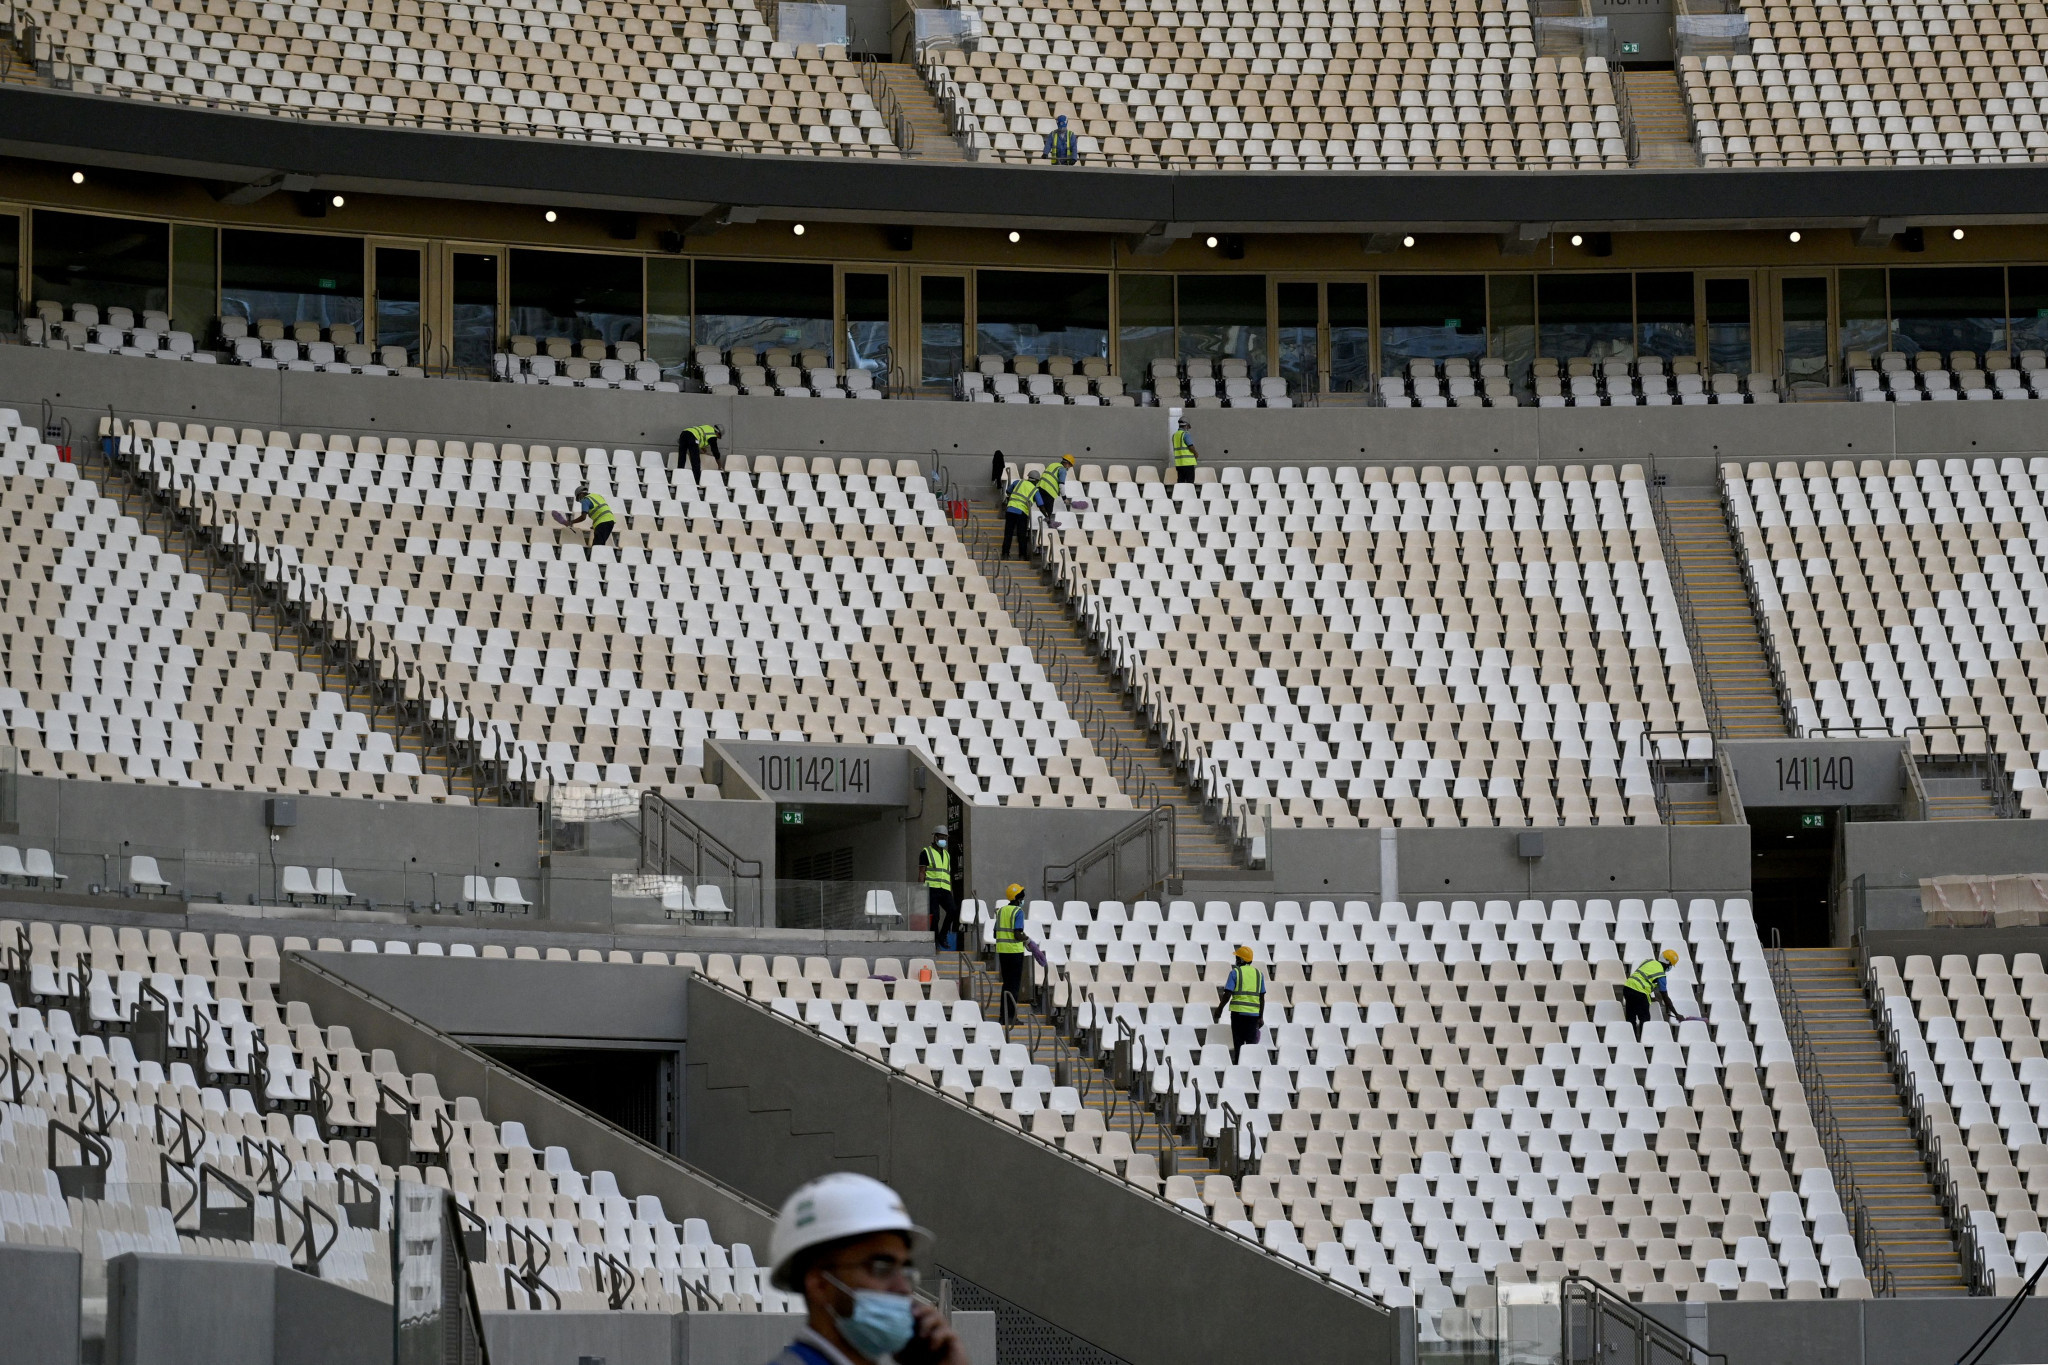 Rights groups urge FIFA and Qatar 2022 sponsors to press for compensation for migrant workers